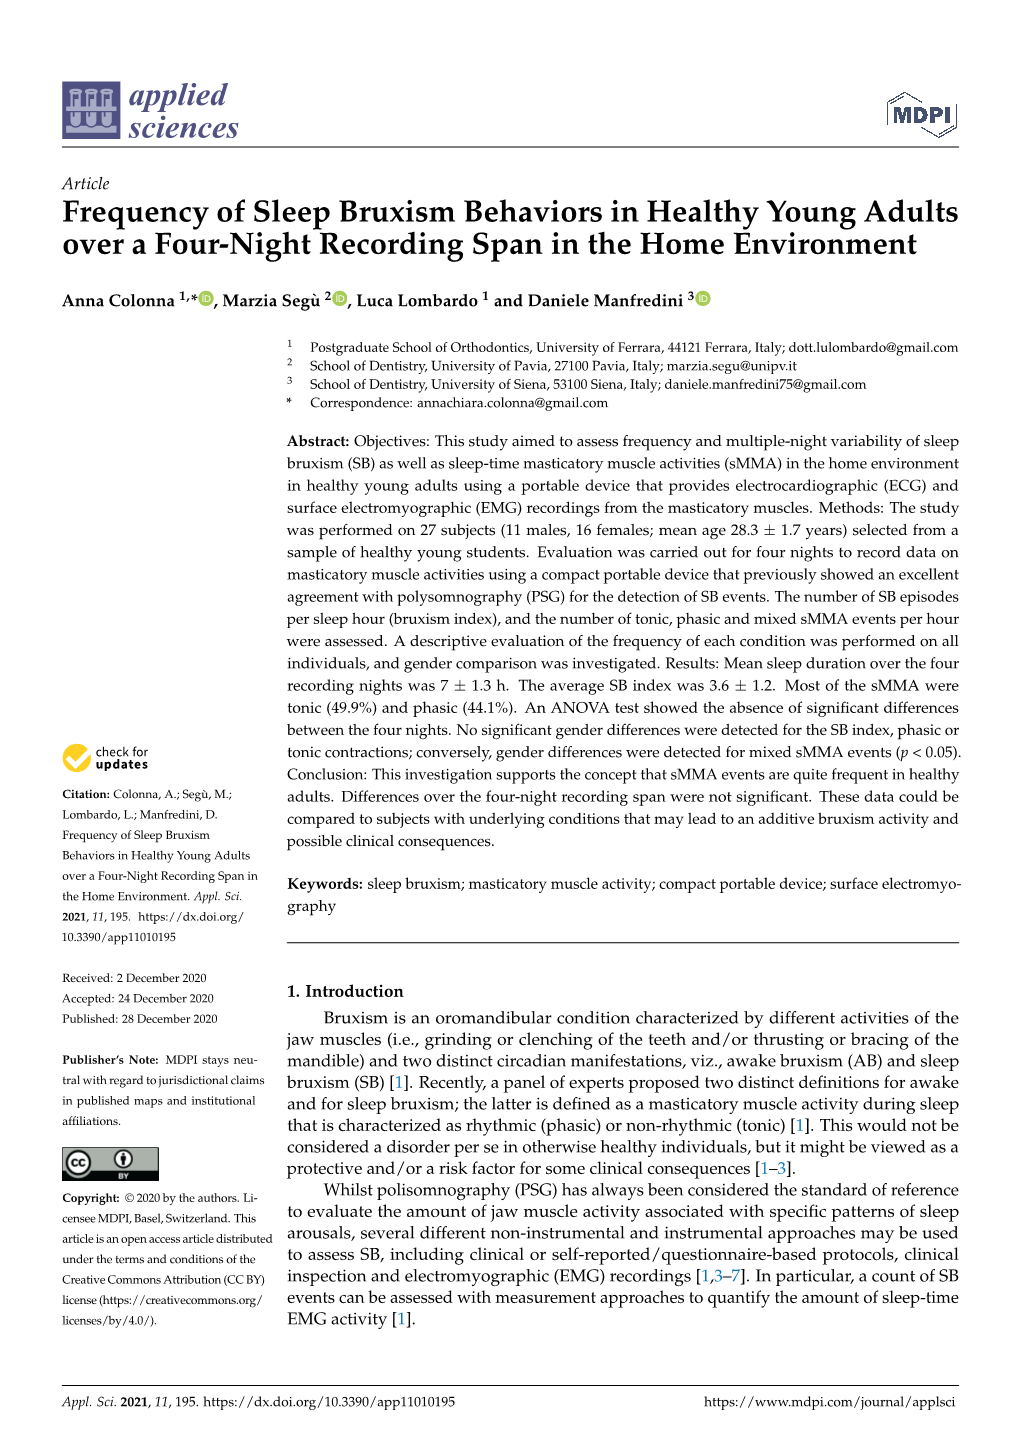 Frequency of Sleep Bruxism Behaviors in Healthy Young Adults Over a Four-Night Recording Span in the Home Environment